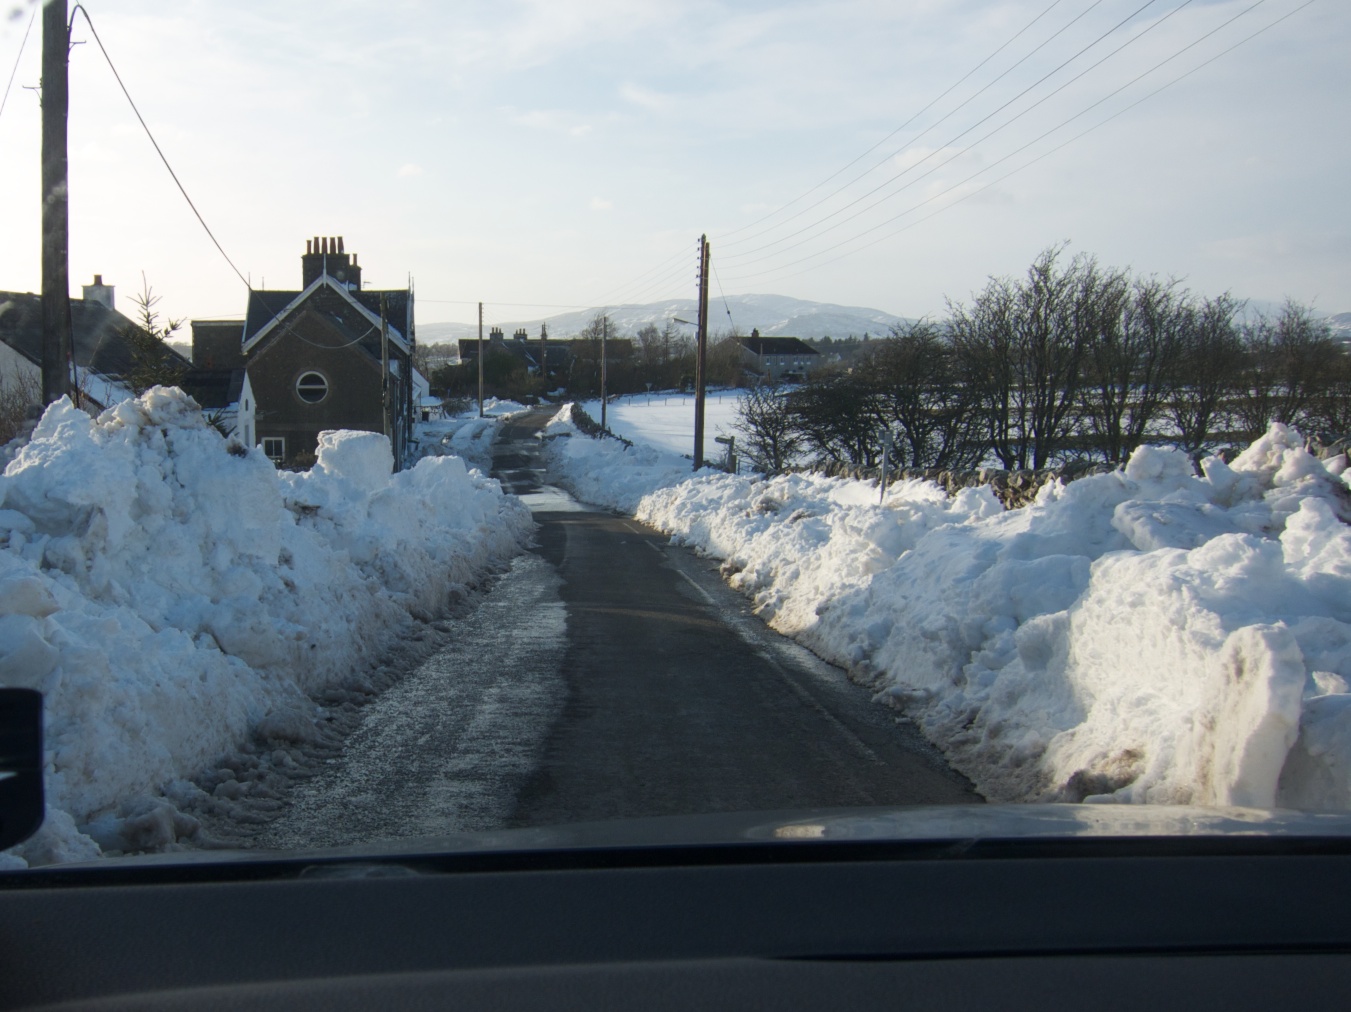 Chapelton Row on the way back from Borgue